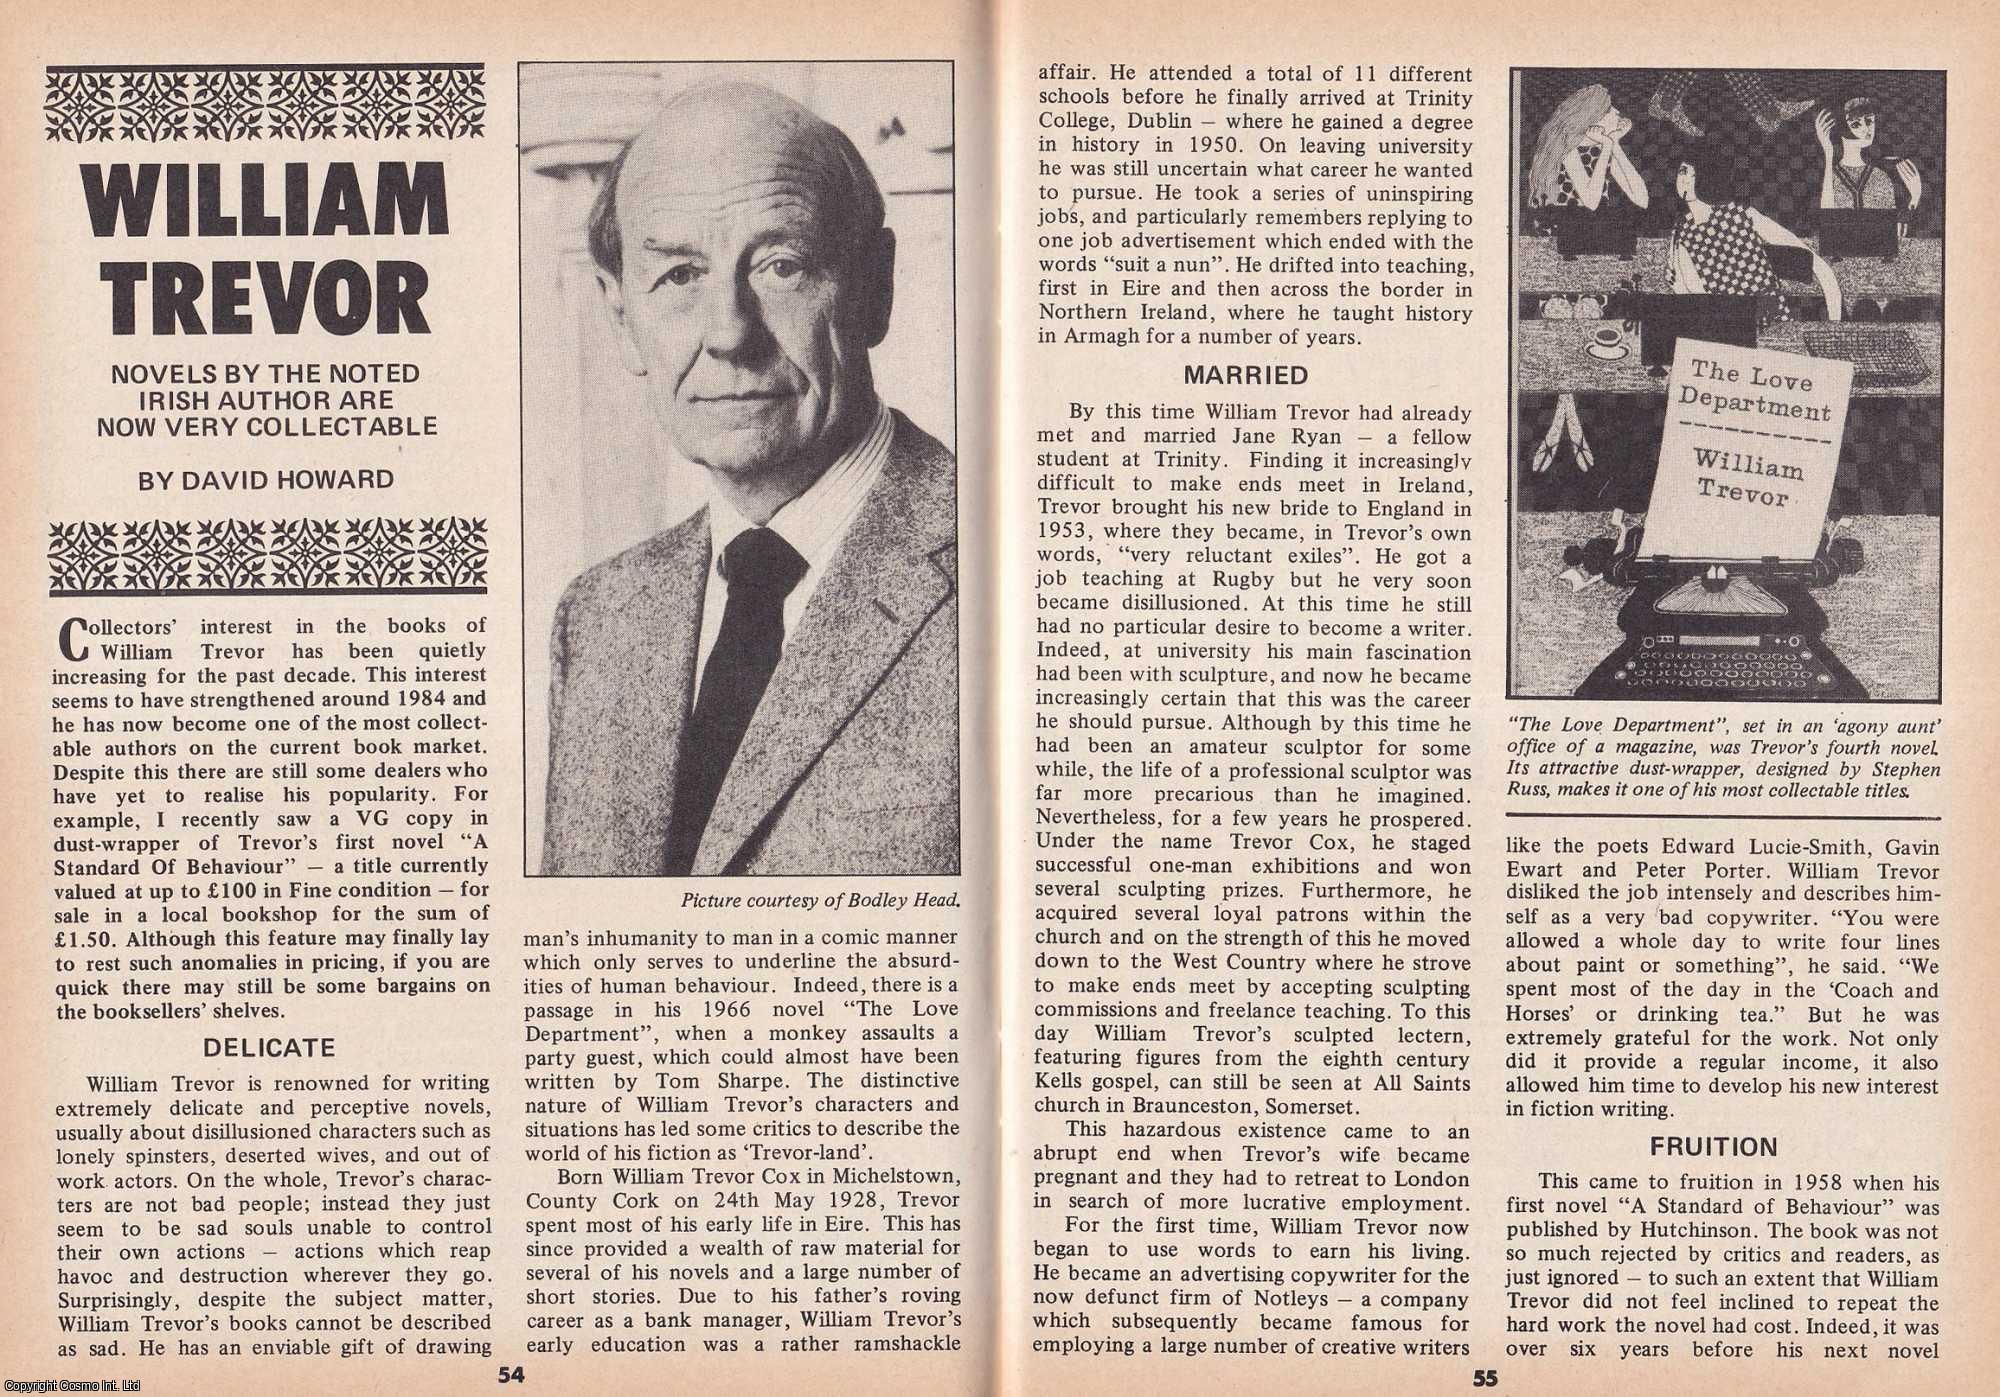 David Howard - William Trevor. Novels by The Irish Author. This is an original article separated from an issue of The Book & Magazine Collector publication, 1988.